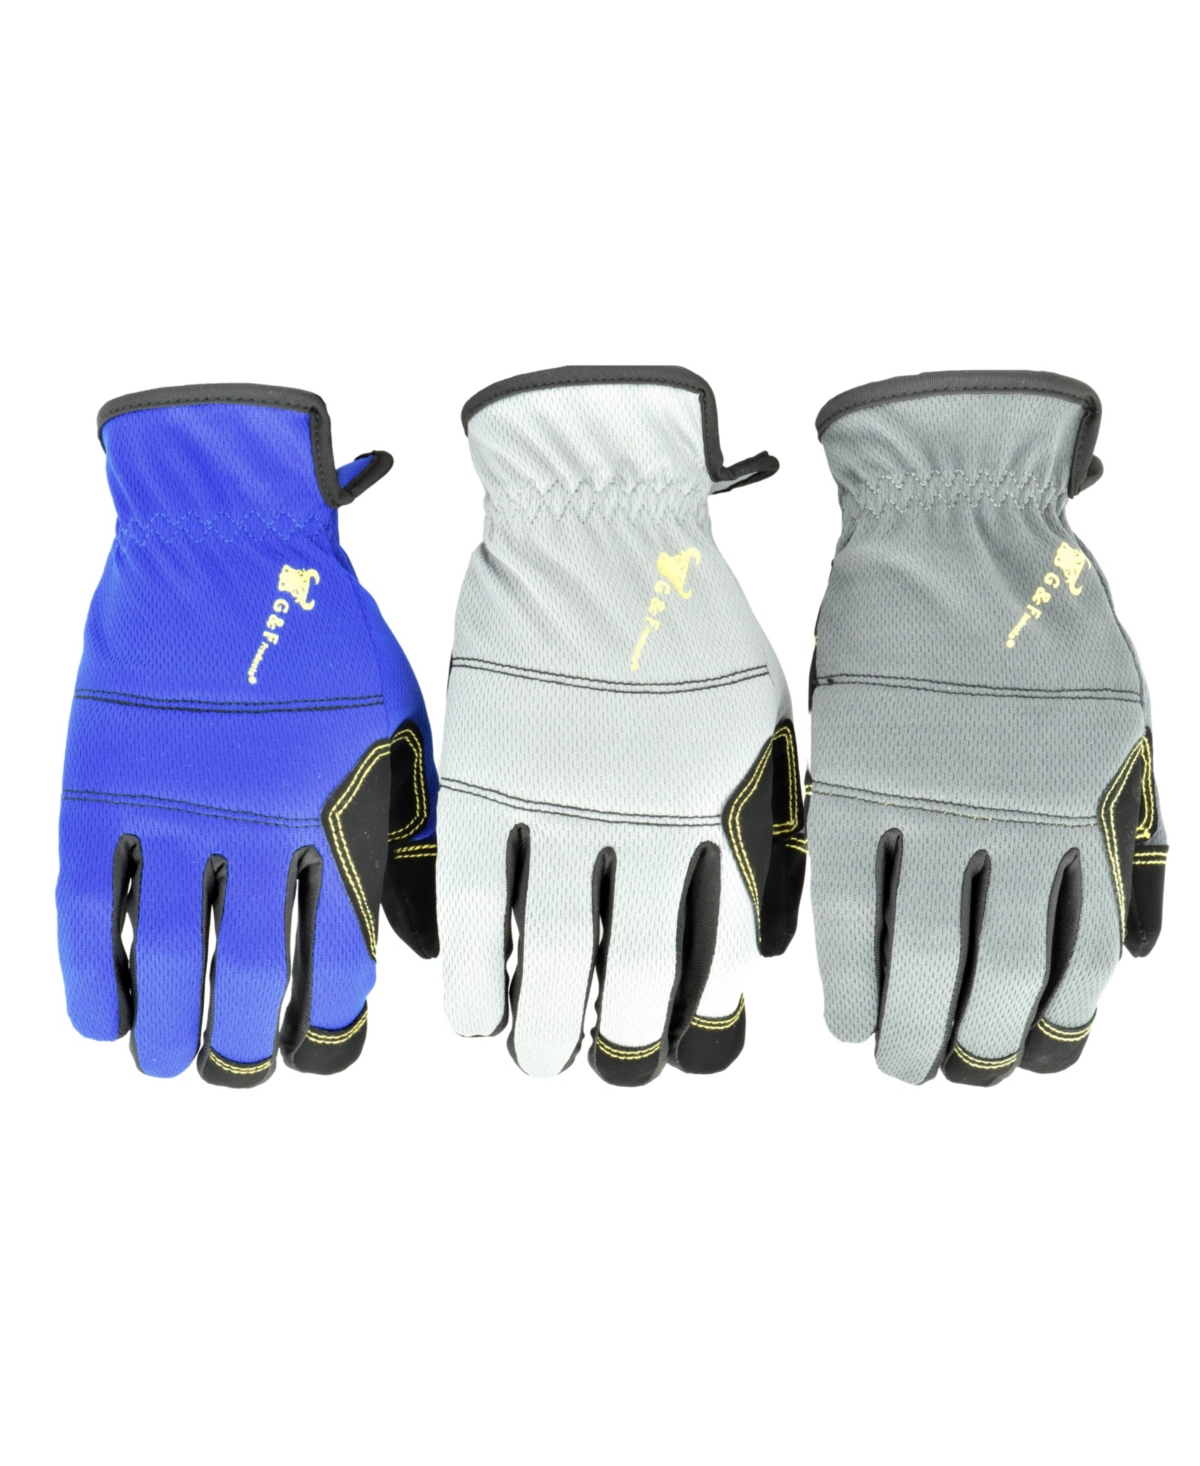 All Purpose Utility Work Gloves High Performance Mechanics Gloves - Assorted Pre-pack